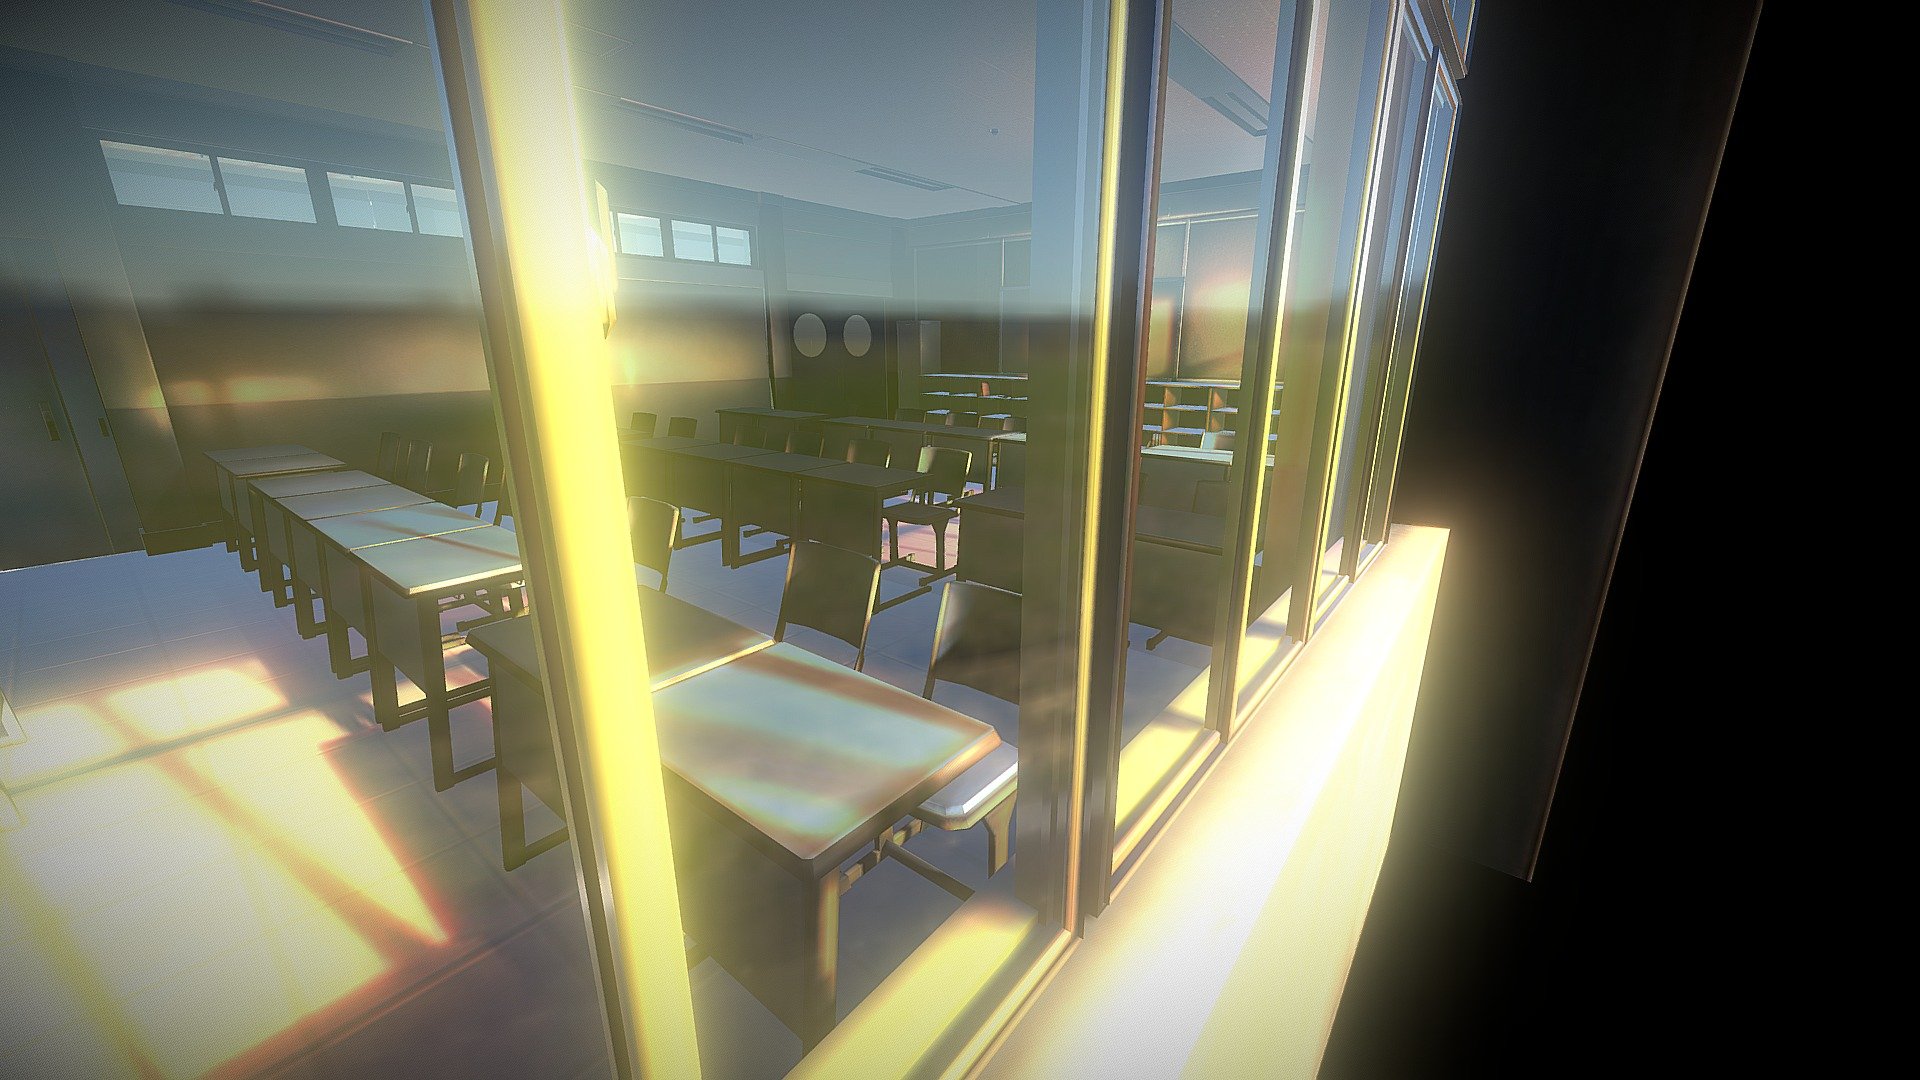 Japanese Classroom - Evening Scene

Dont Ask for free downloads, it will never happen! - Japanese Classroom - Evening Scene - Buy Royalty Free 3D model by OGL (@GaryLim) 3d model